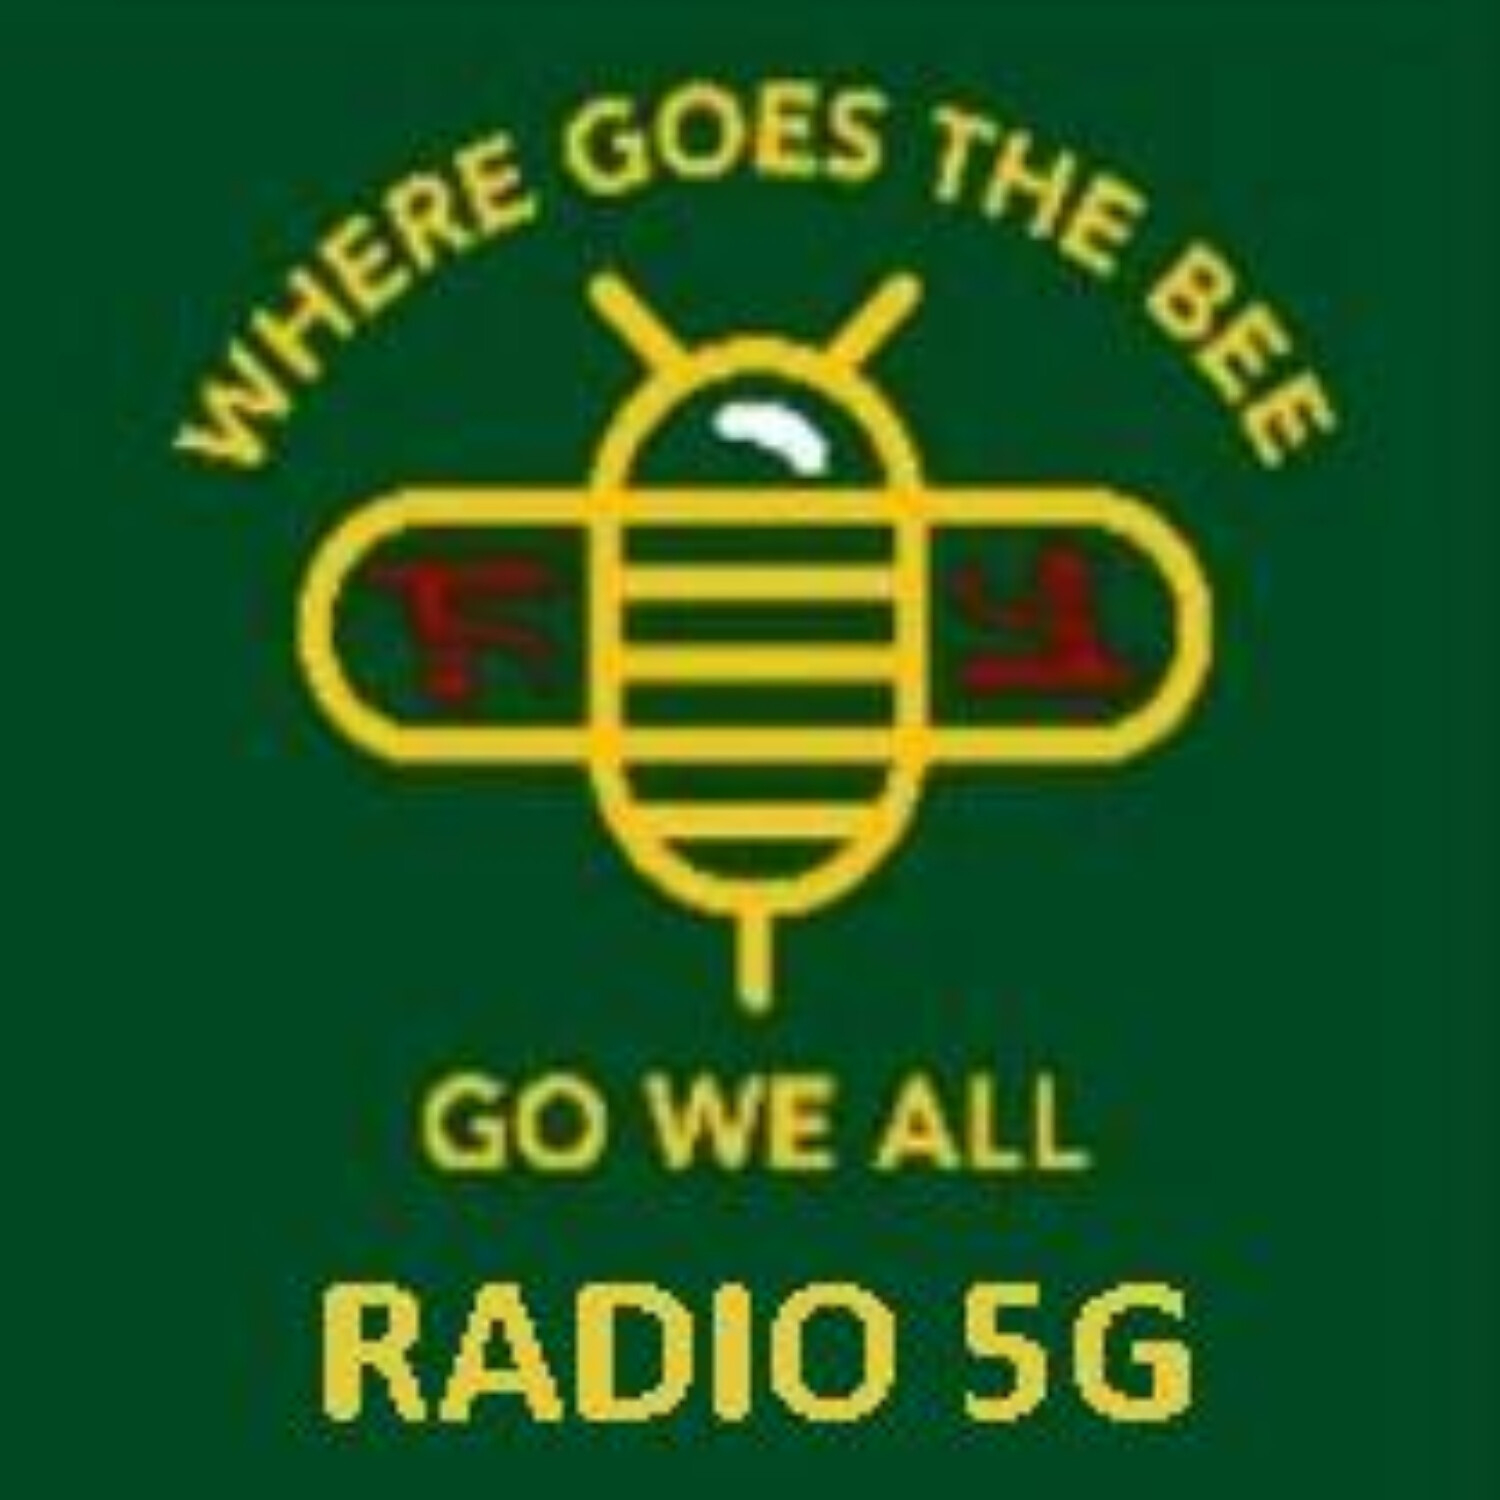 “RADIO 5G” 8/23/22 - REPLAY from 6/29/22 From Demons to Angels